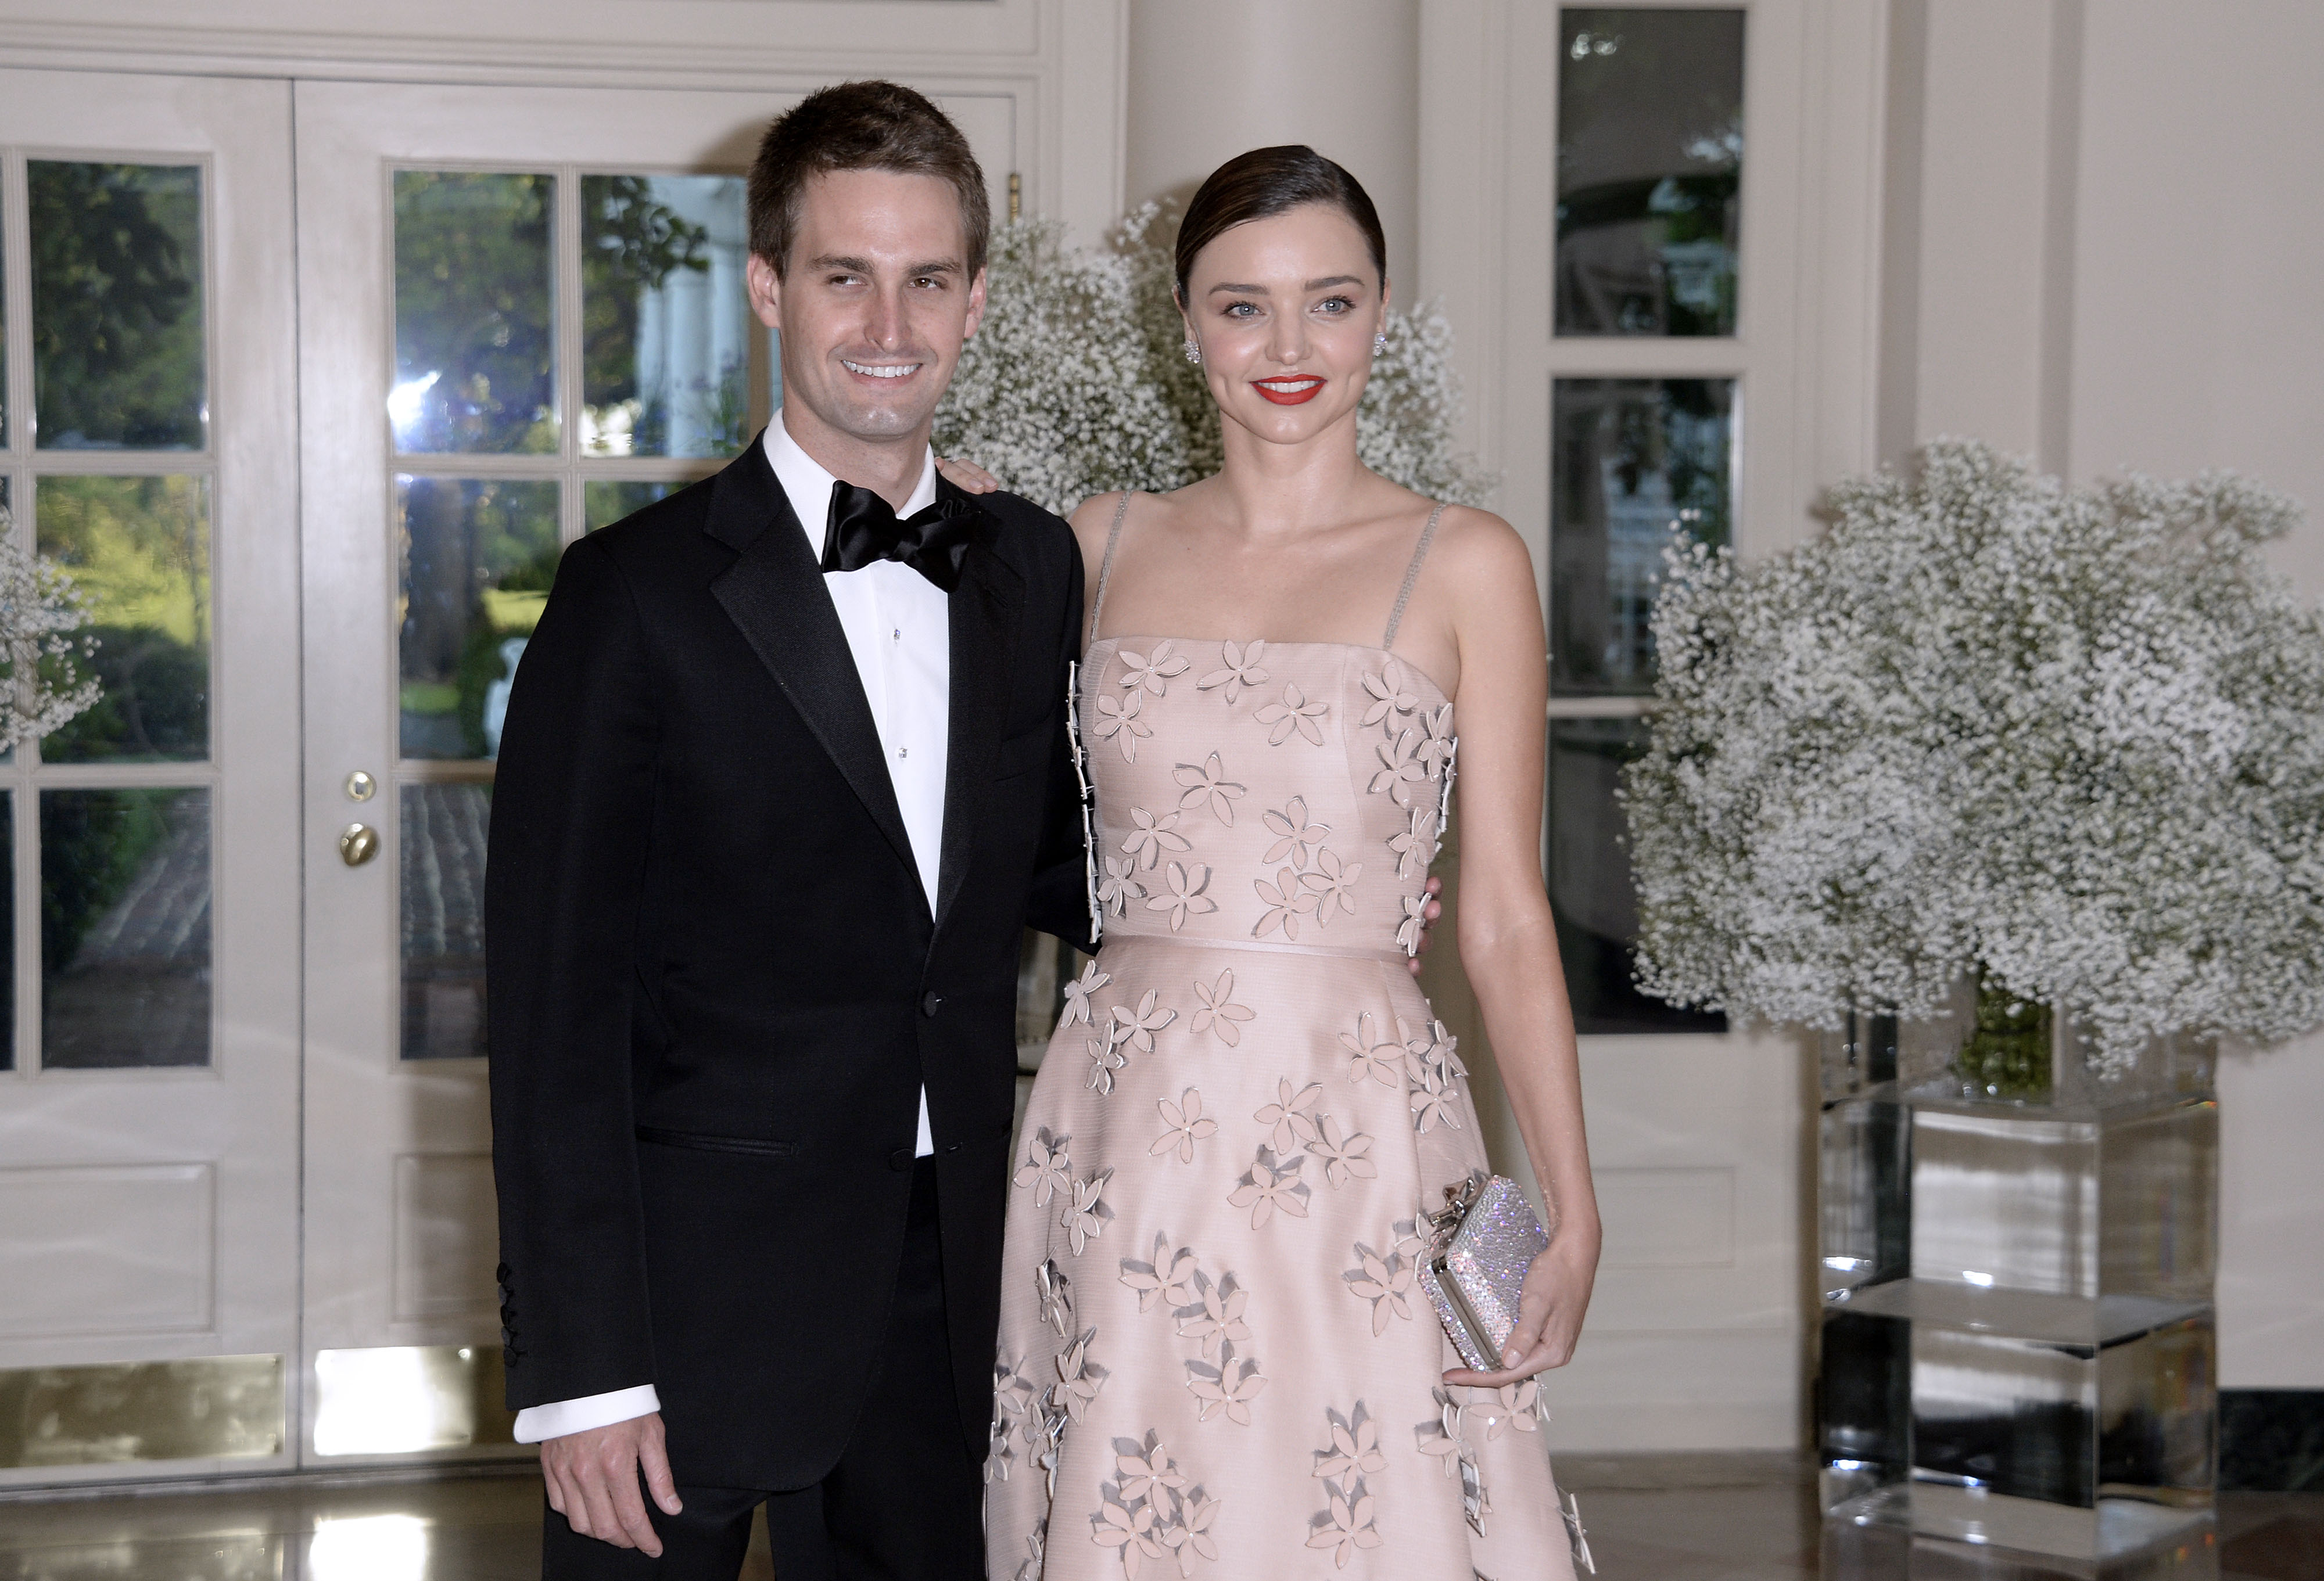 Miranda Kerr and Evan Spiegel attend a state dinner on May 13, 2016 in Washington, DC | Source: Getty Images